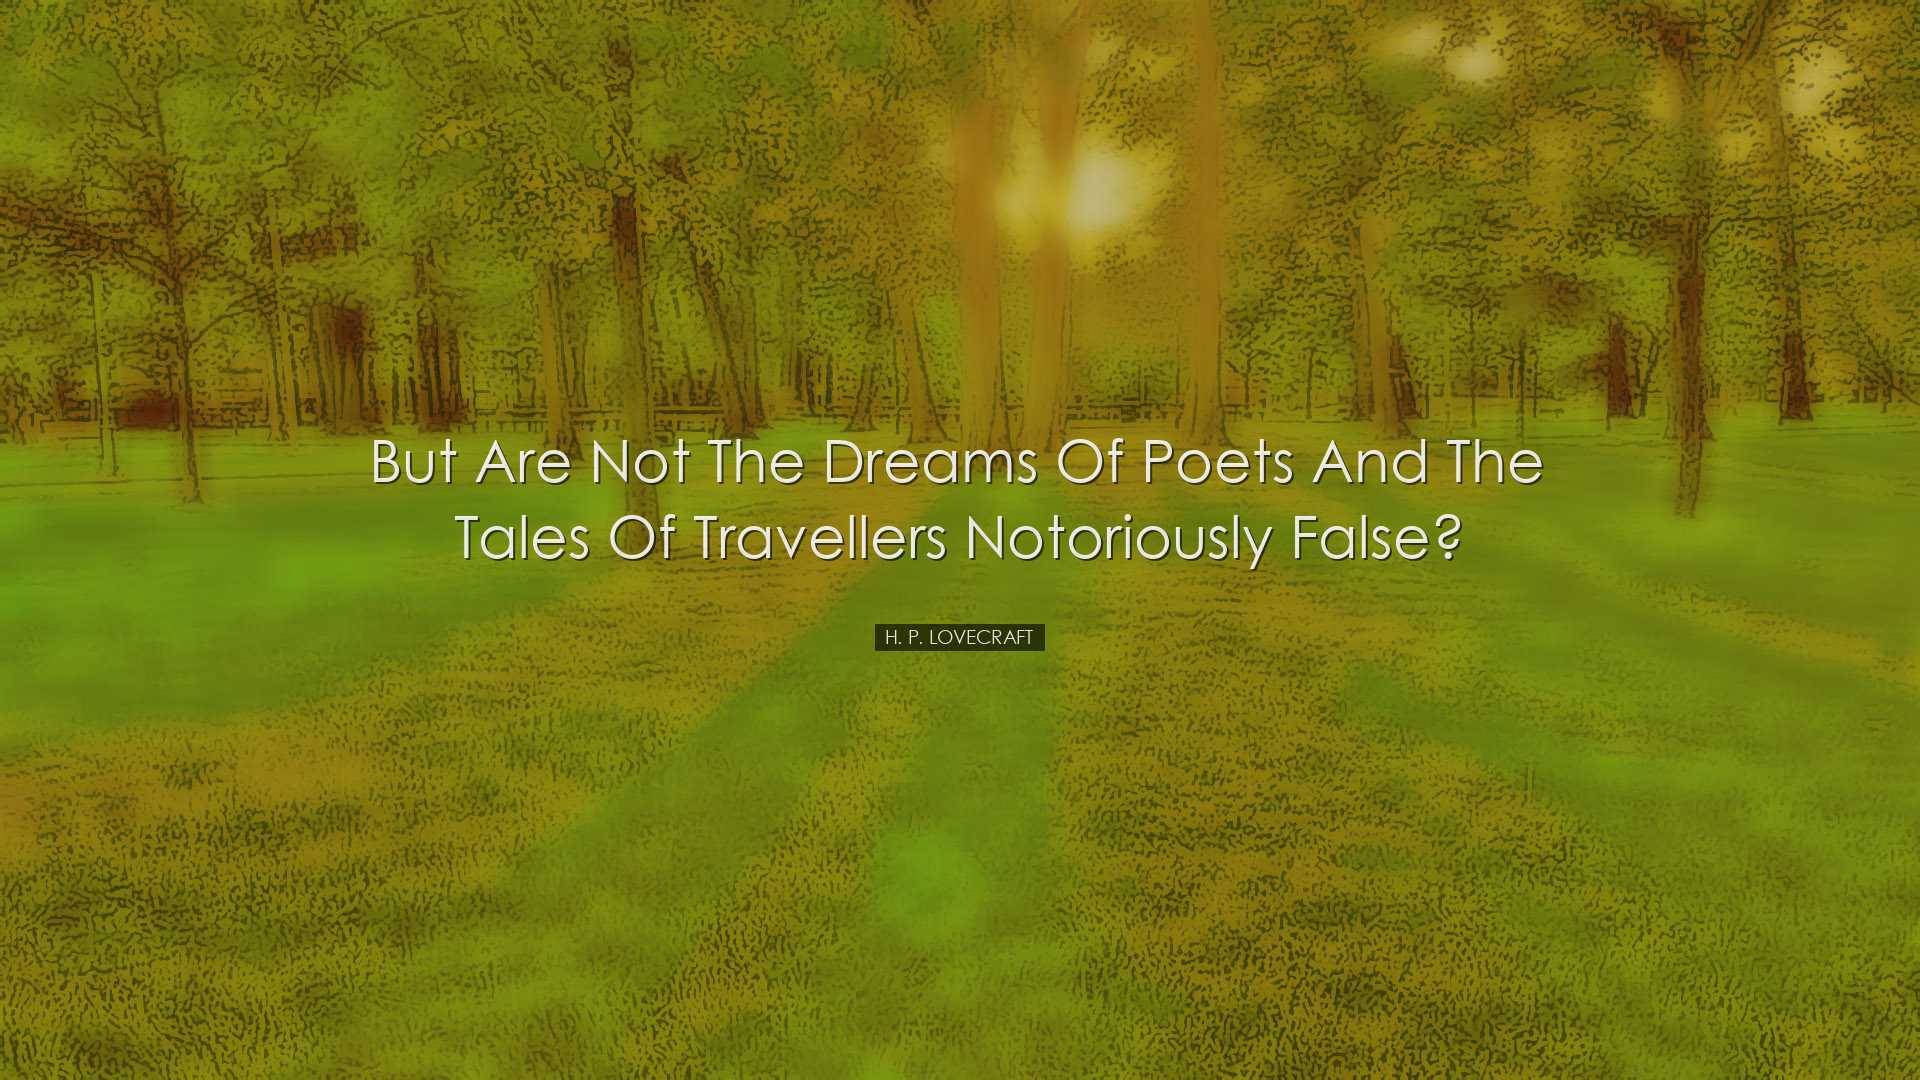 But are not the dreams of poets and the tales of travellers notori